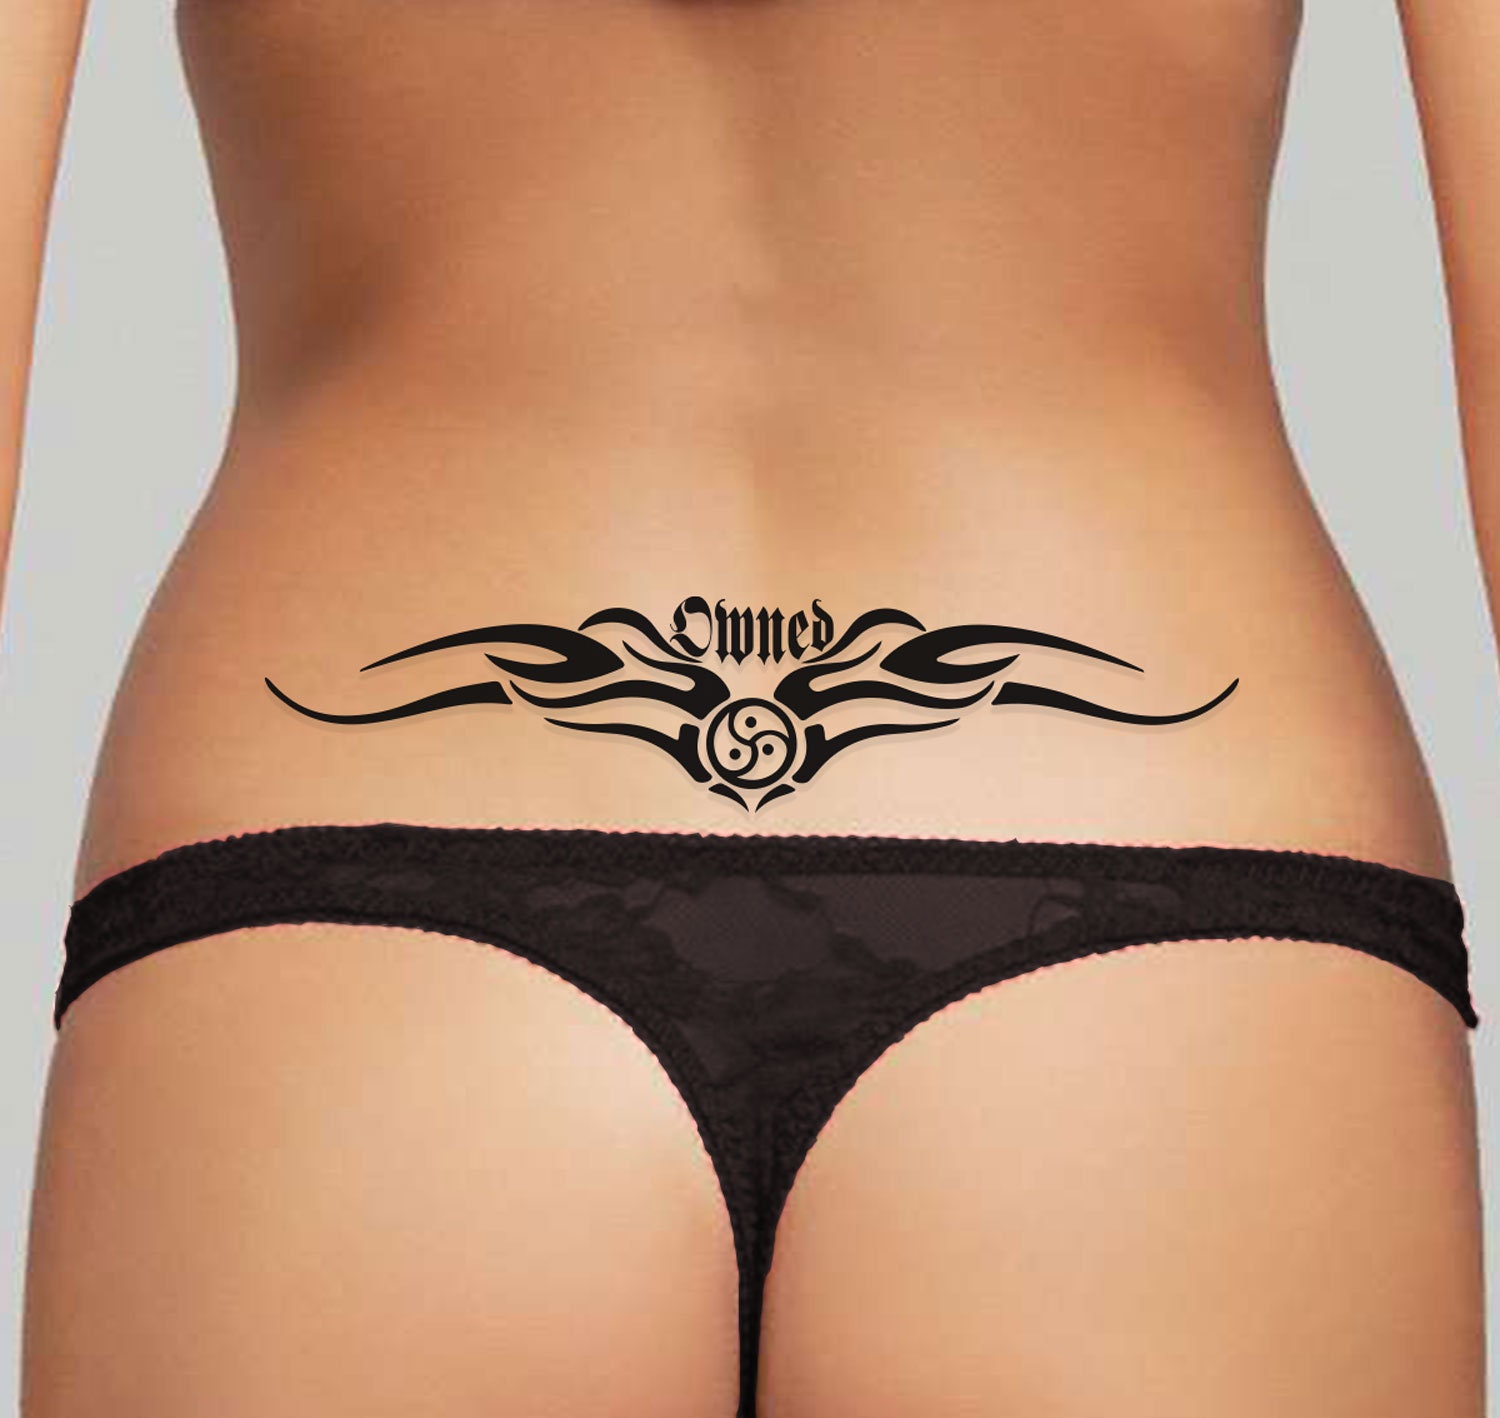 3x Adult Lower Back Temporary Tattoos Tramp Stamps BDSM